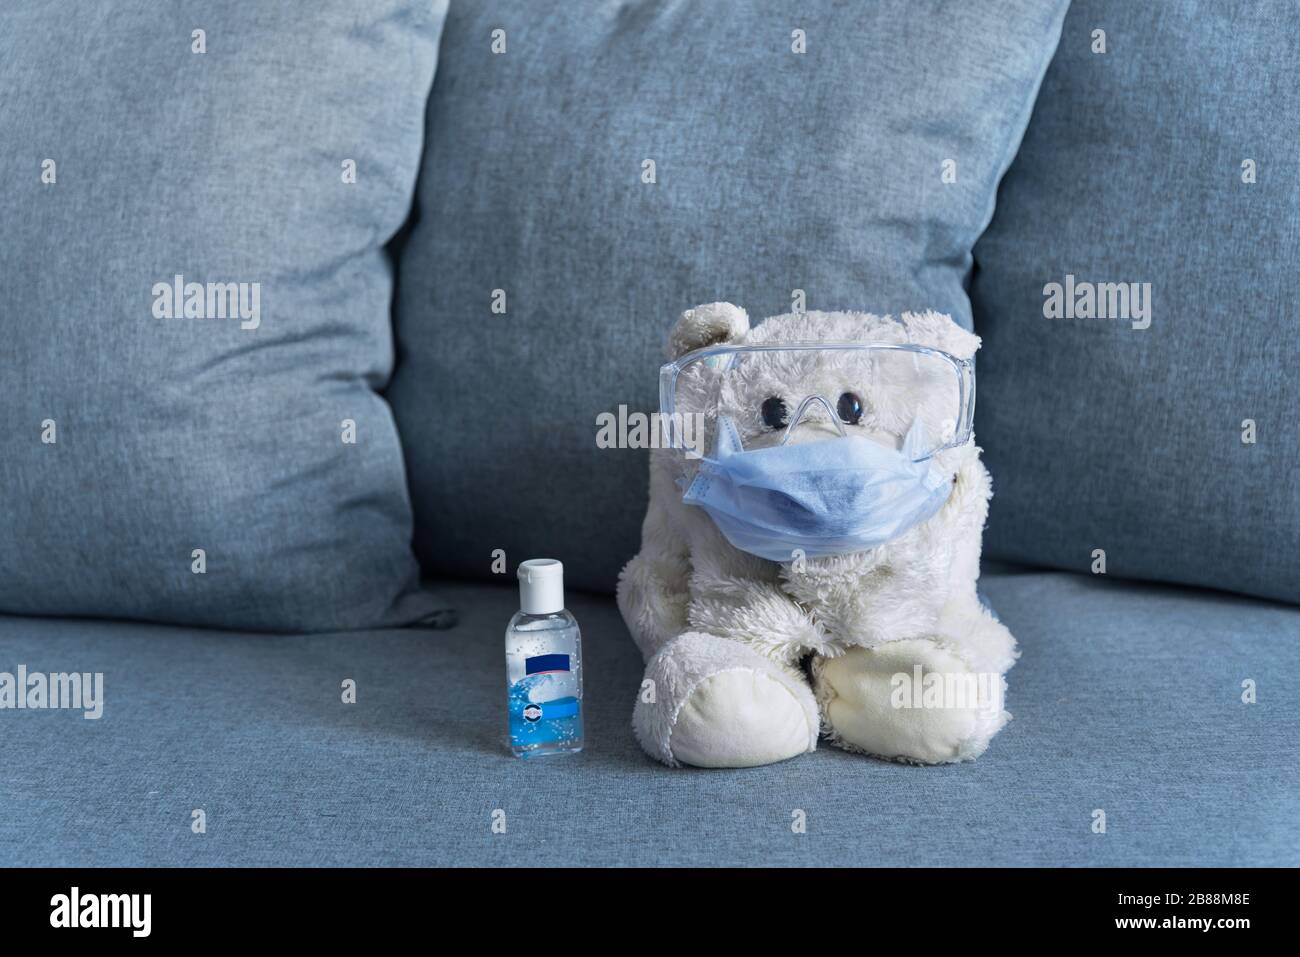 white teddy bear sitting on sofa wearing mask and protective glasses with hand sanitizer next to it Stock Photo